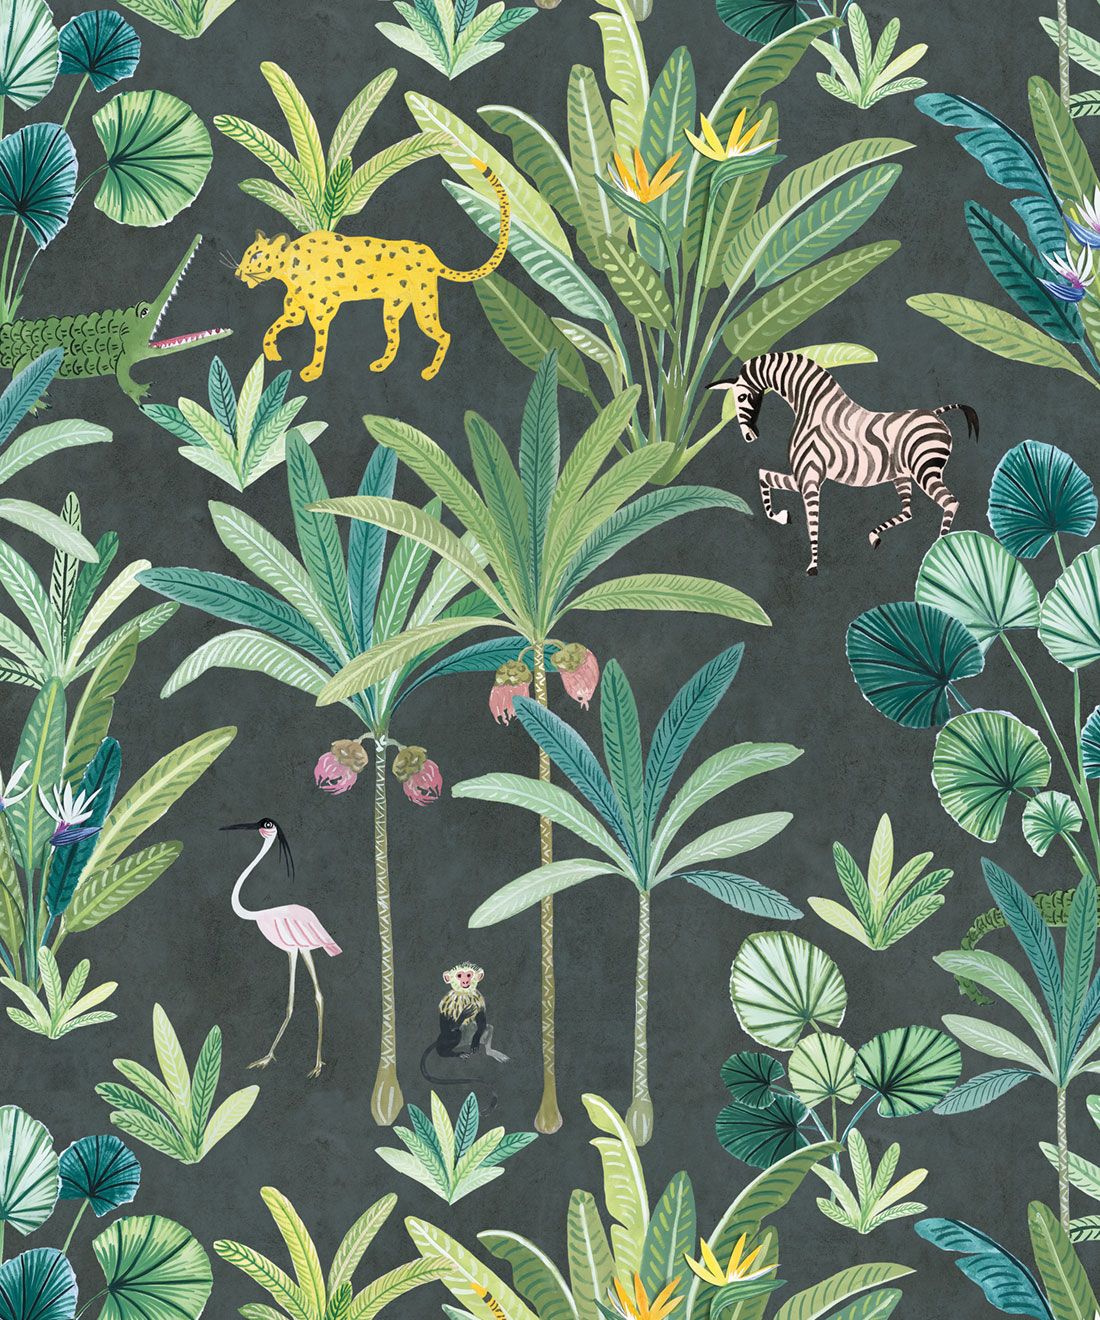 A jungle scene with animals and plants - Jungle